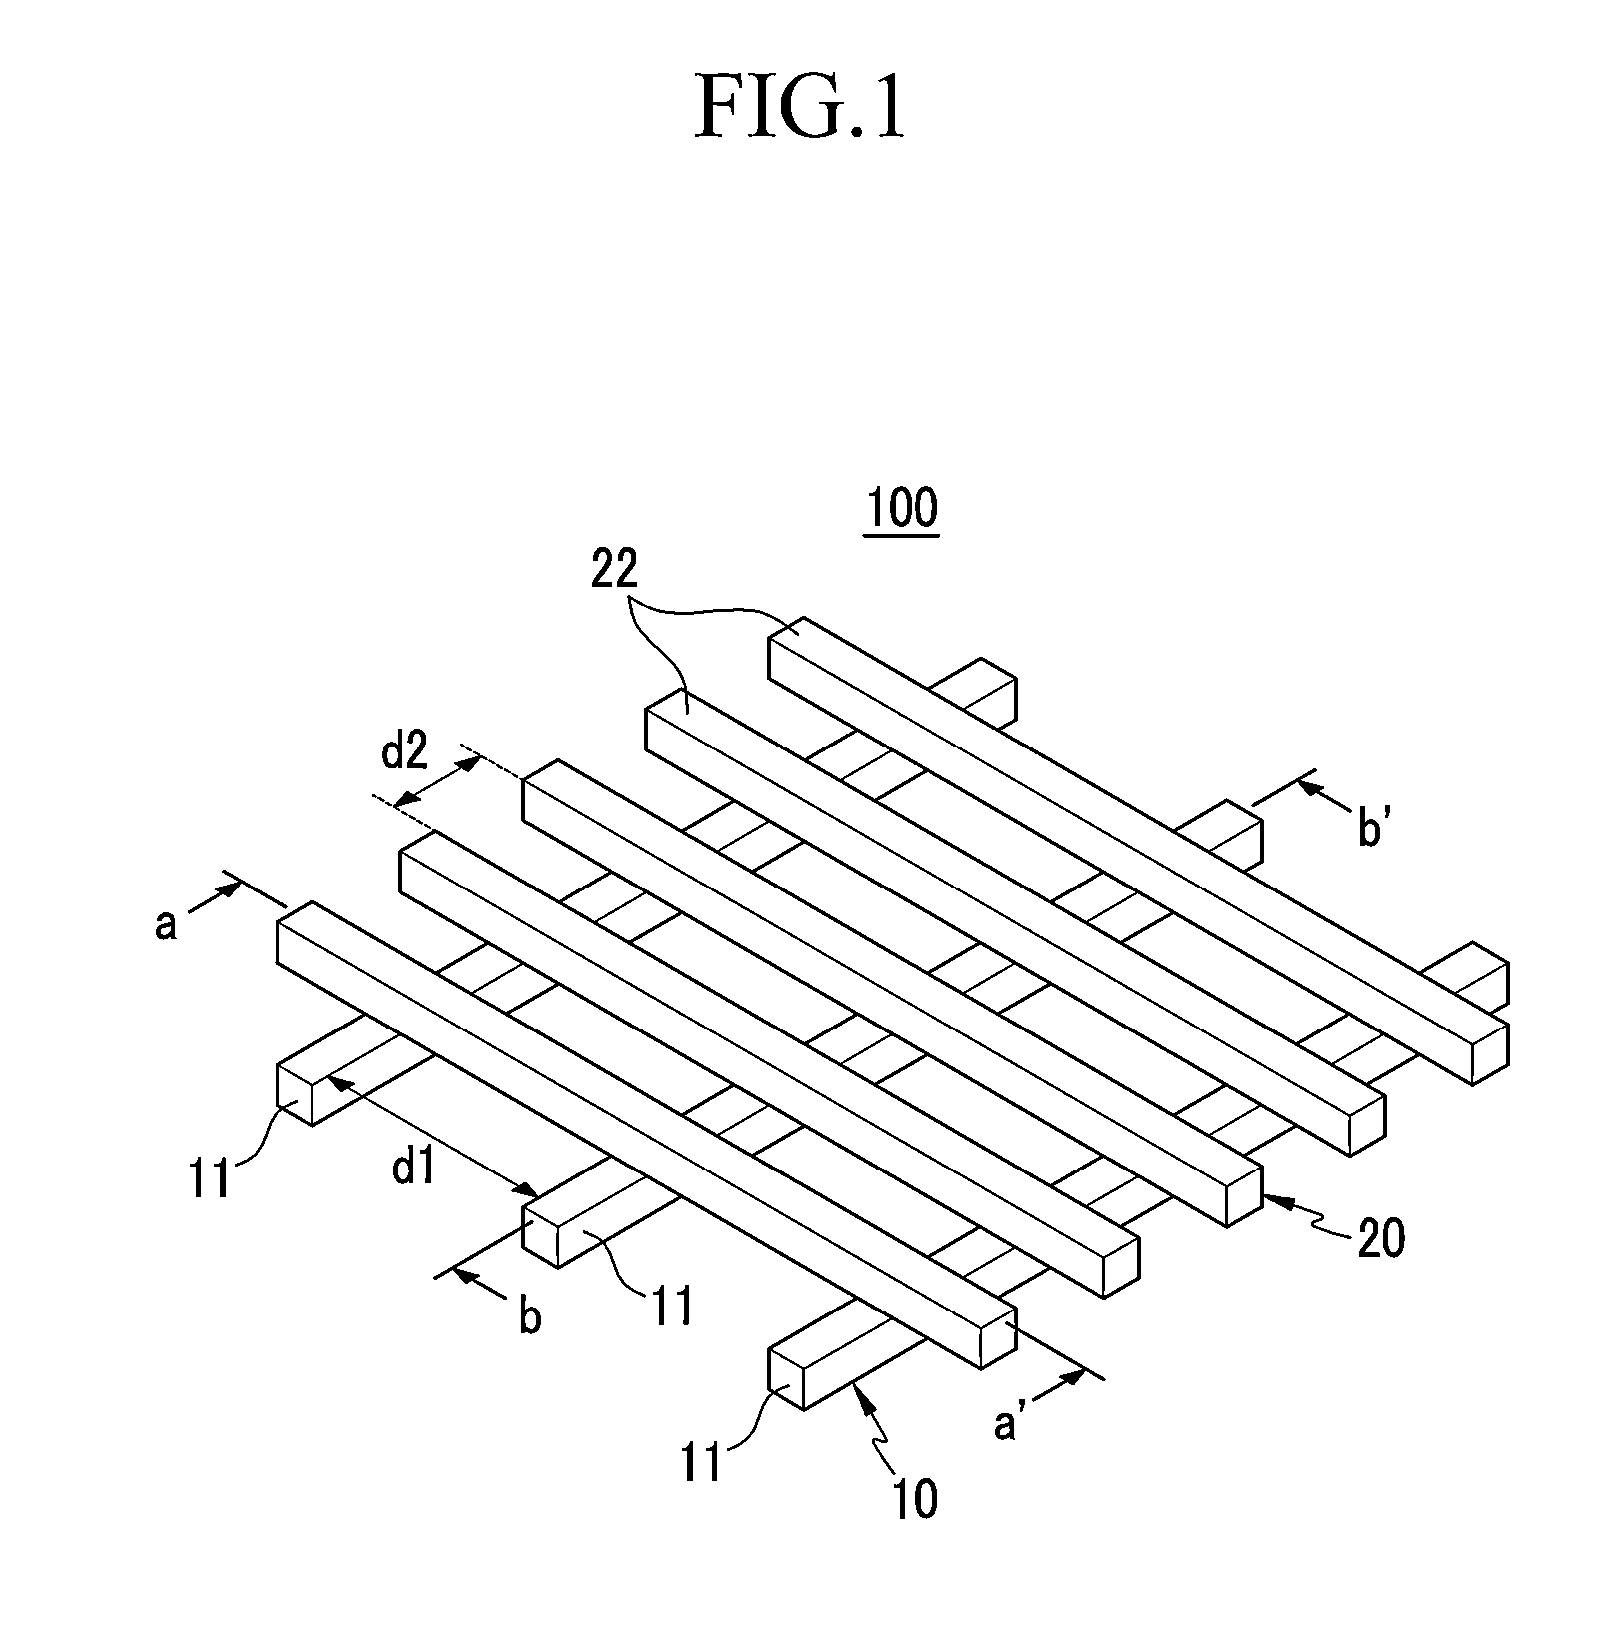 Membrane-type artificial scaffold and method for fabricating same